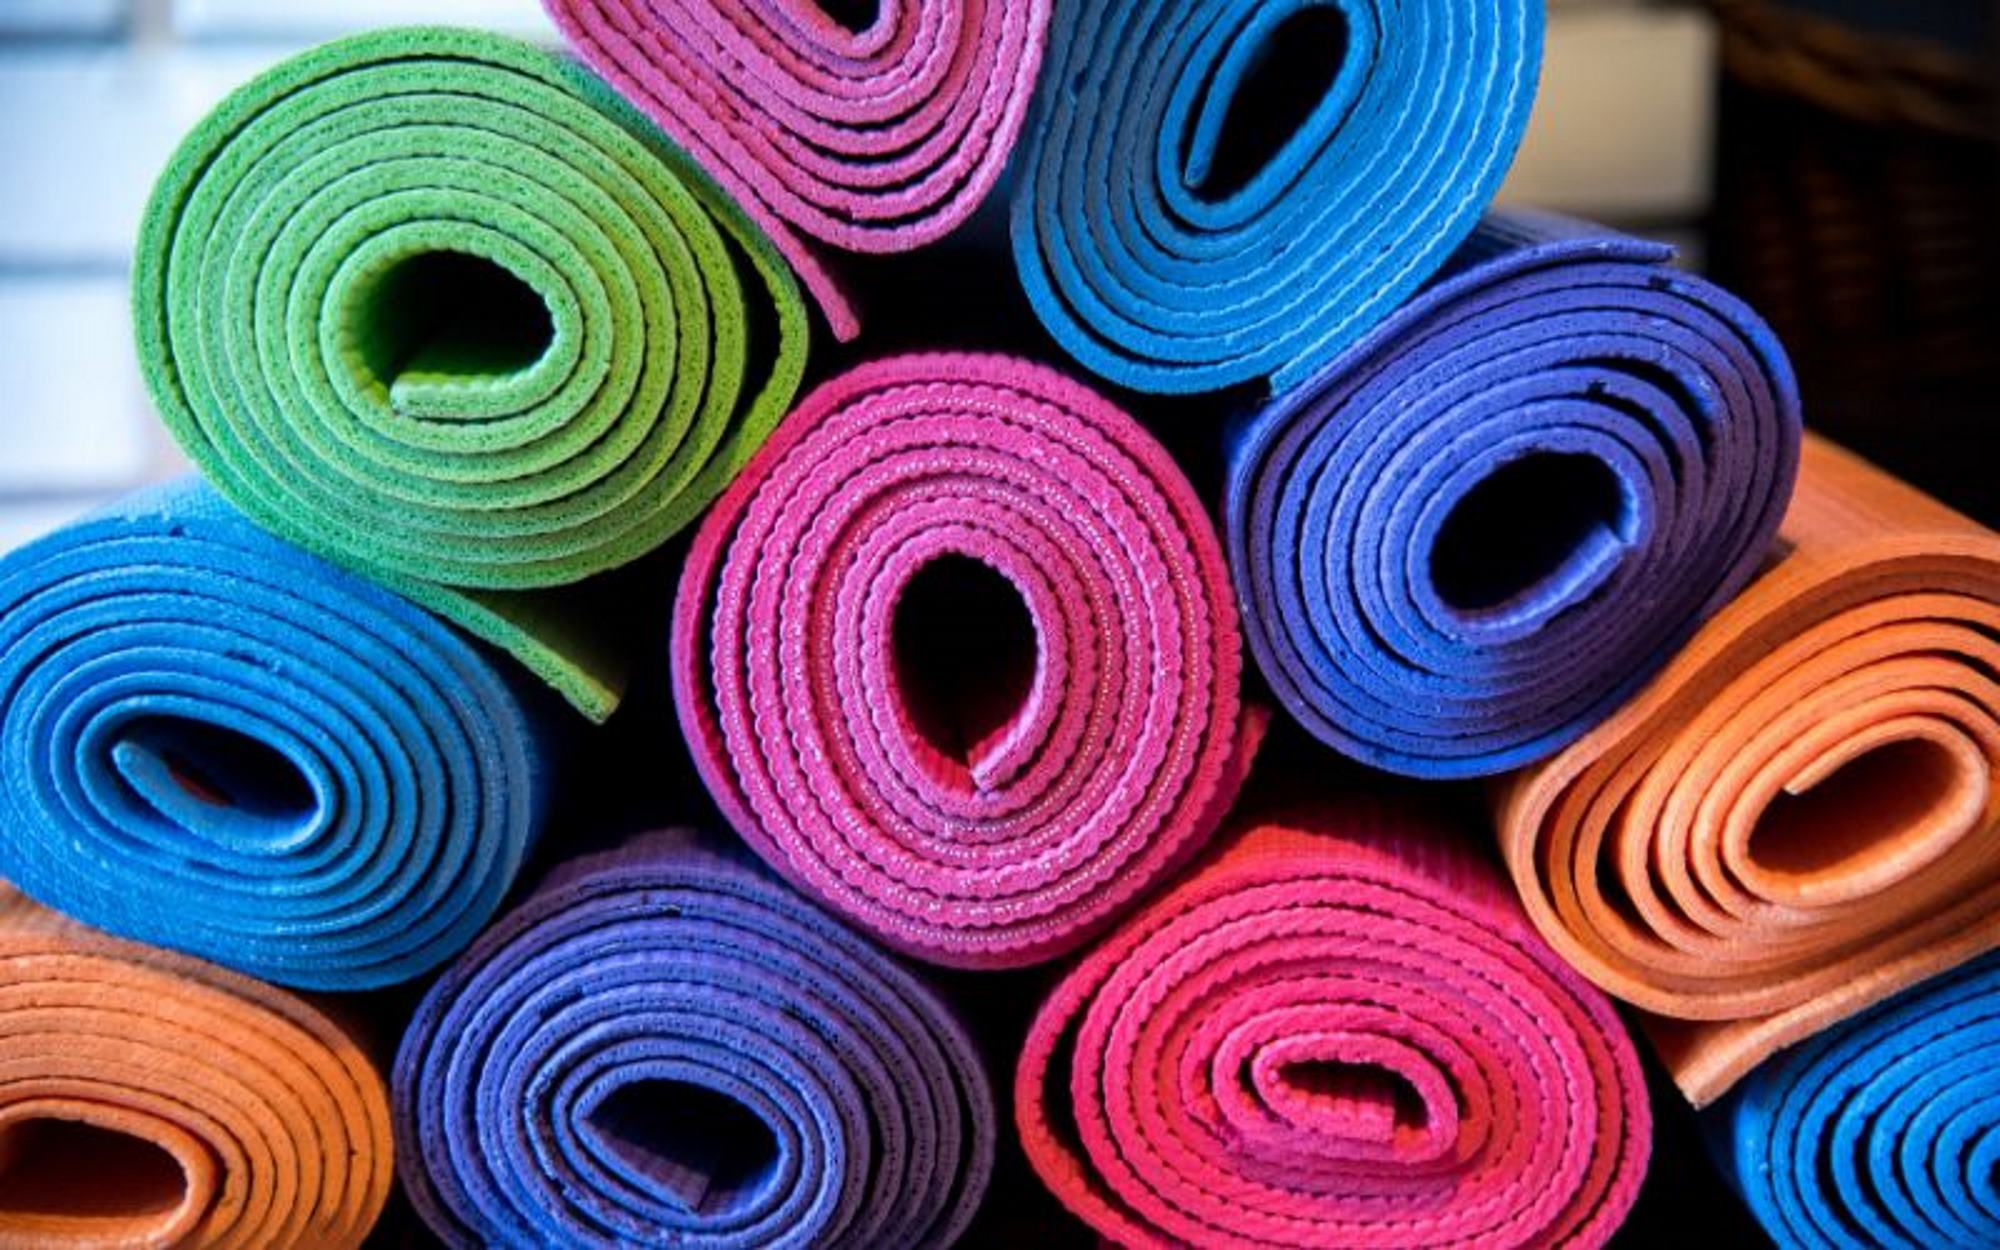 A selection of colorful yoga mats.